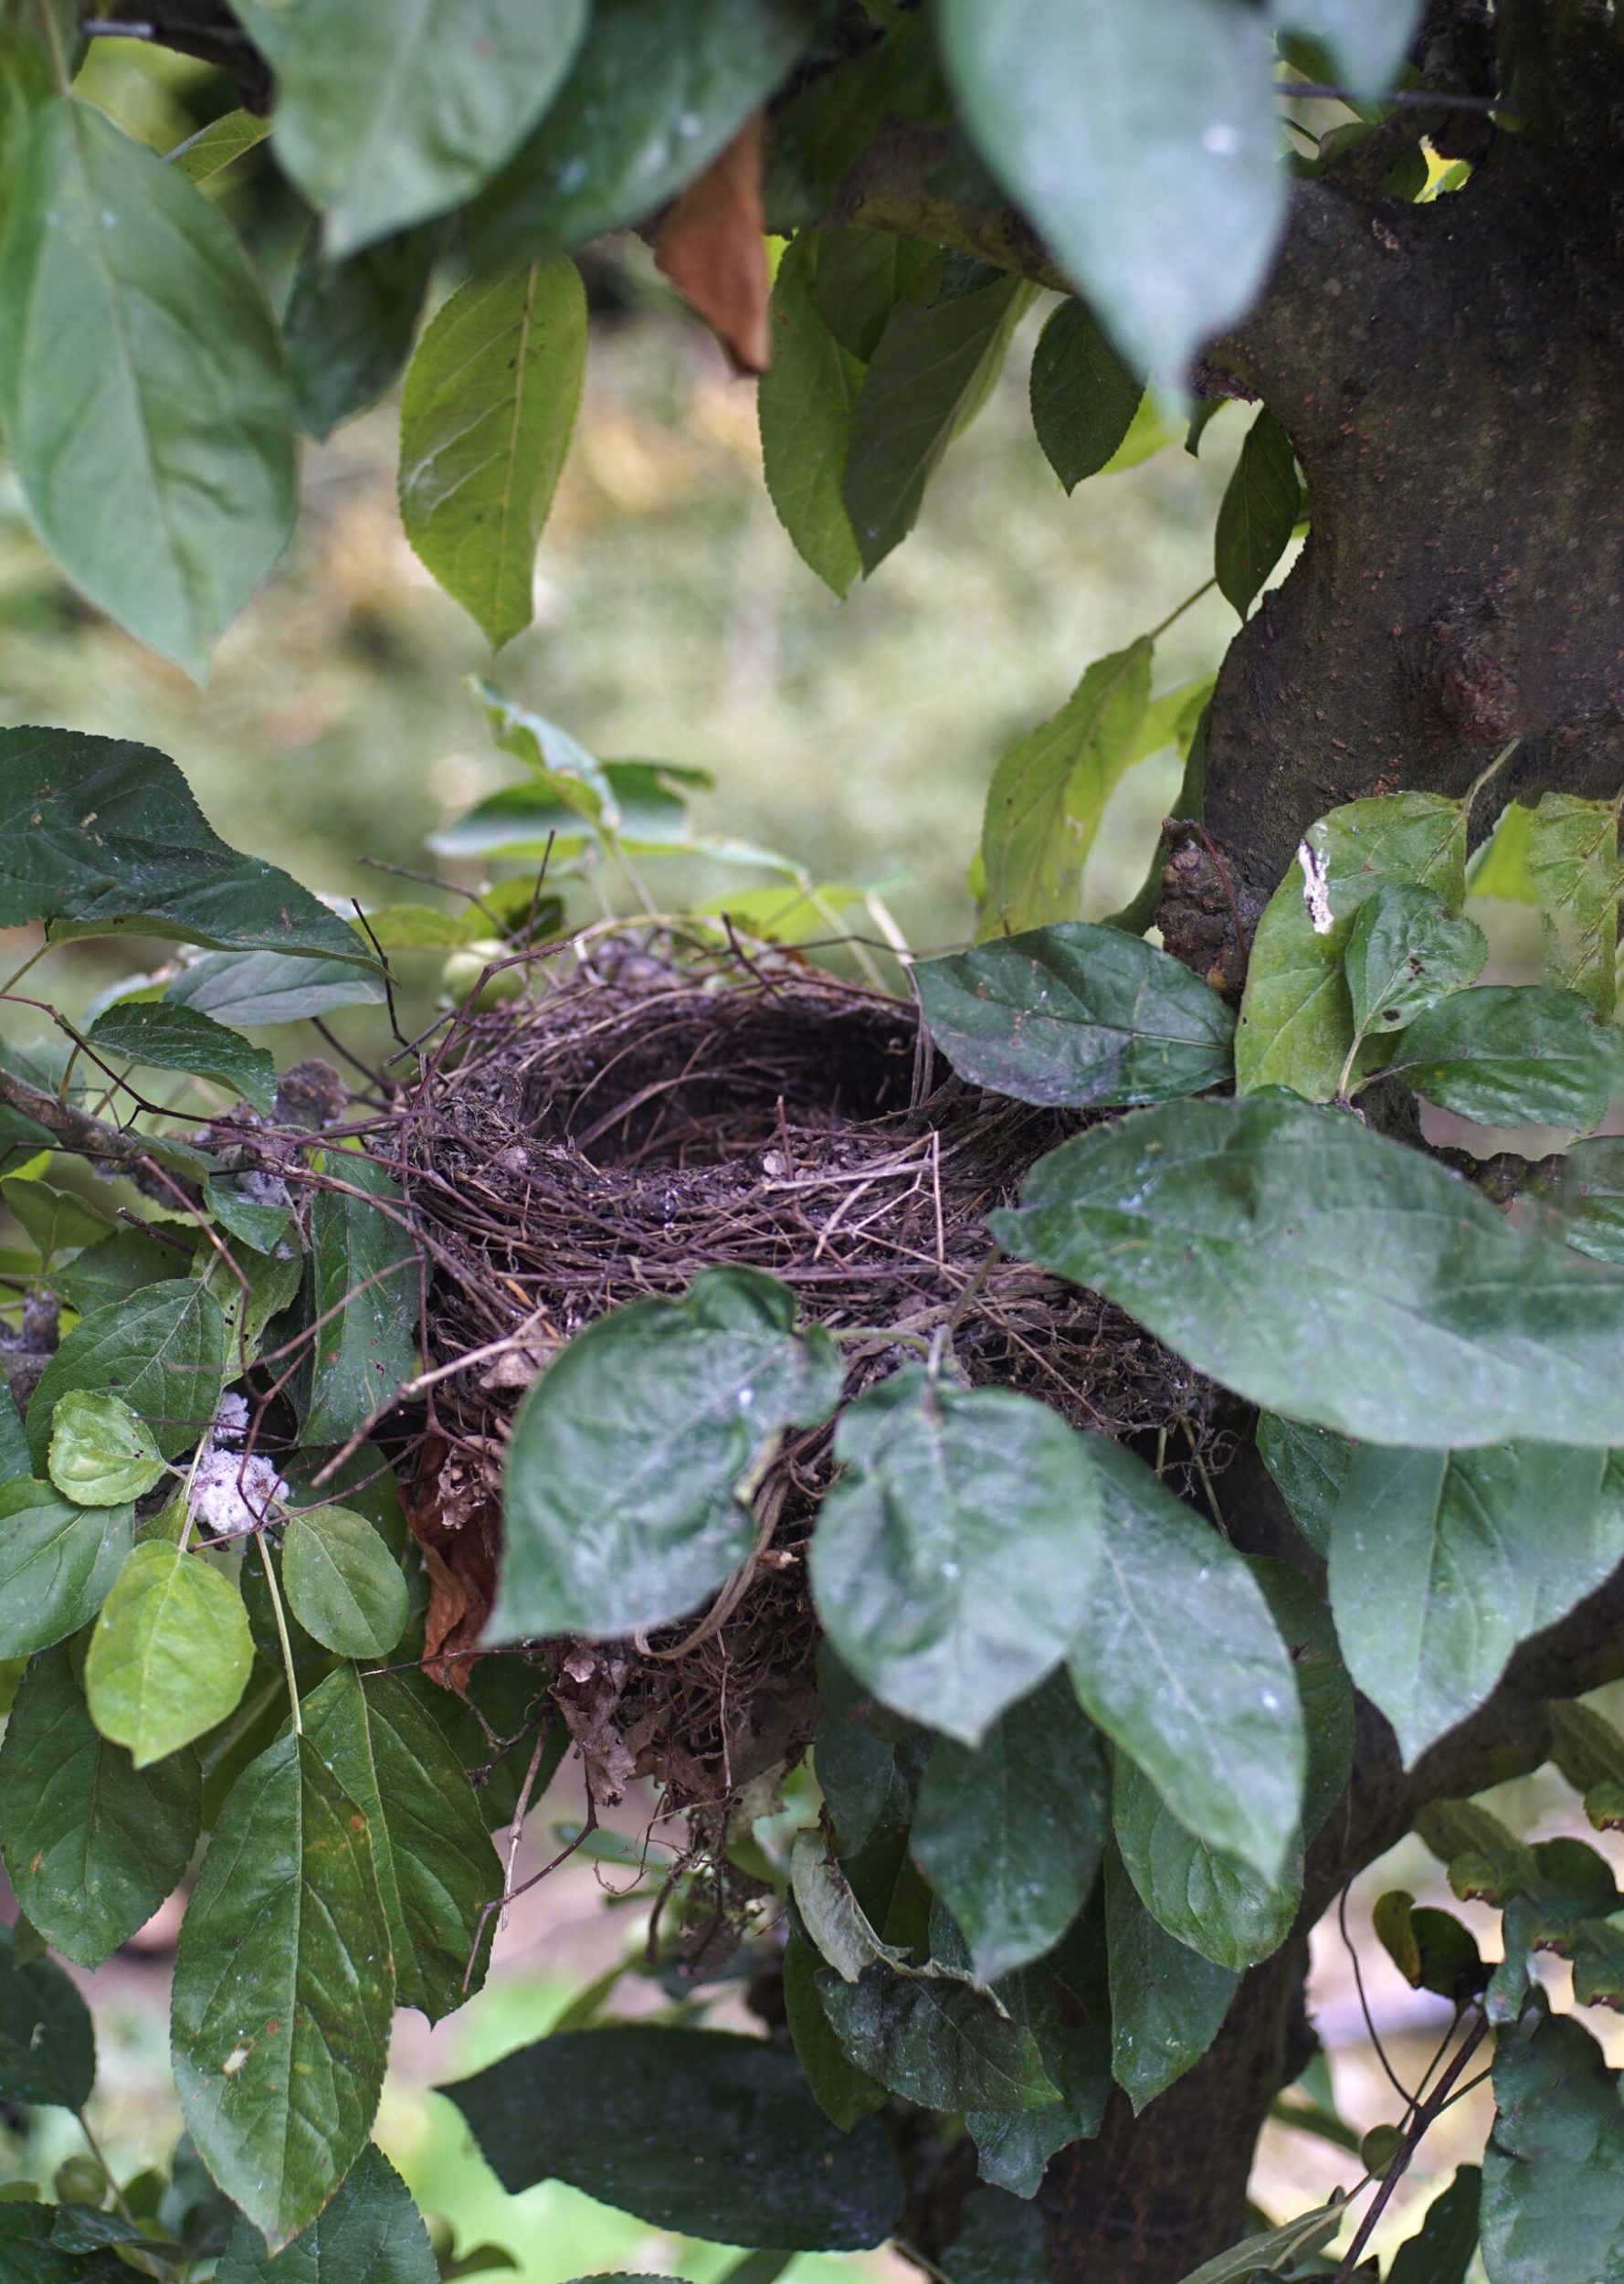 A bird's nest in a tree surrounded by leaves